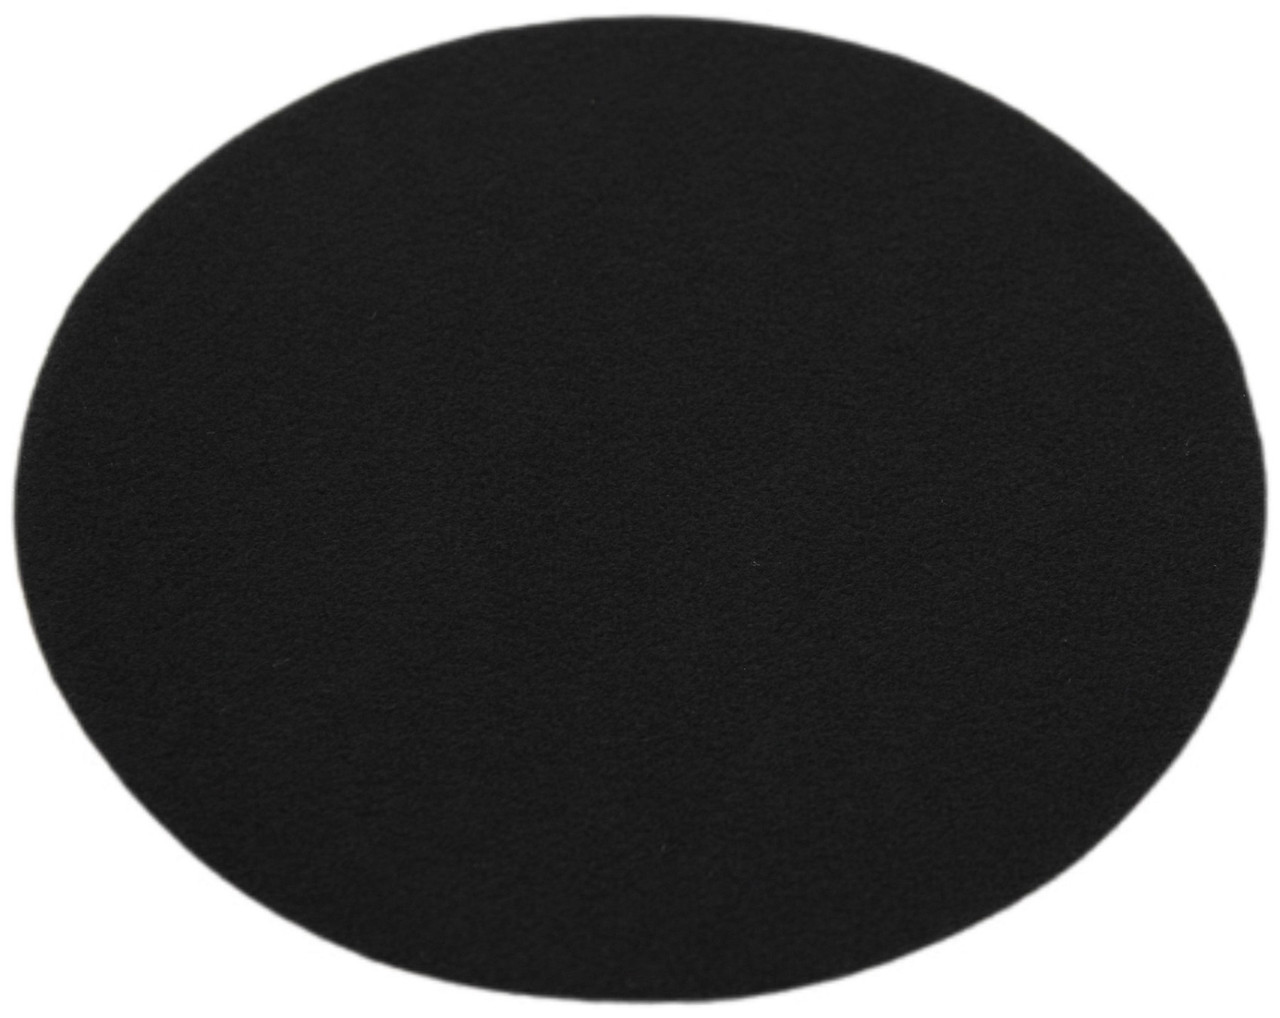 soft velcro fabric, soft velcro fabric Suppliers and Manufacturers at